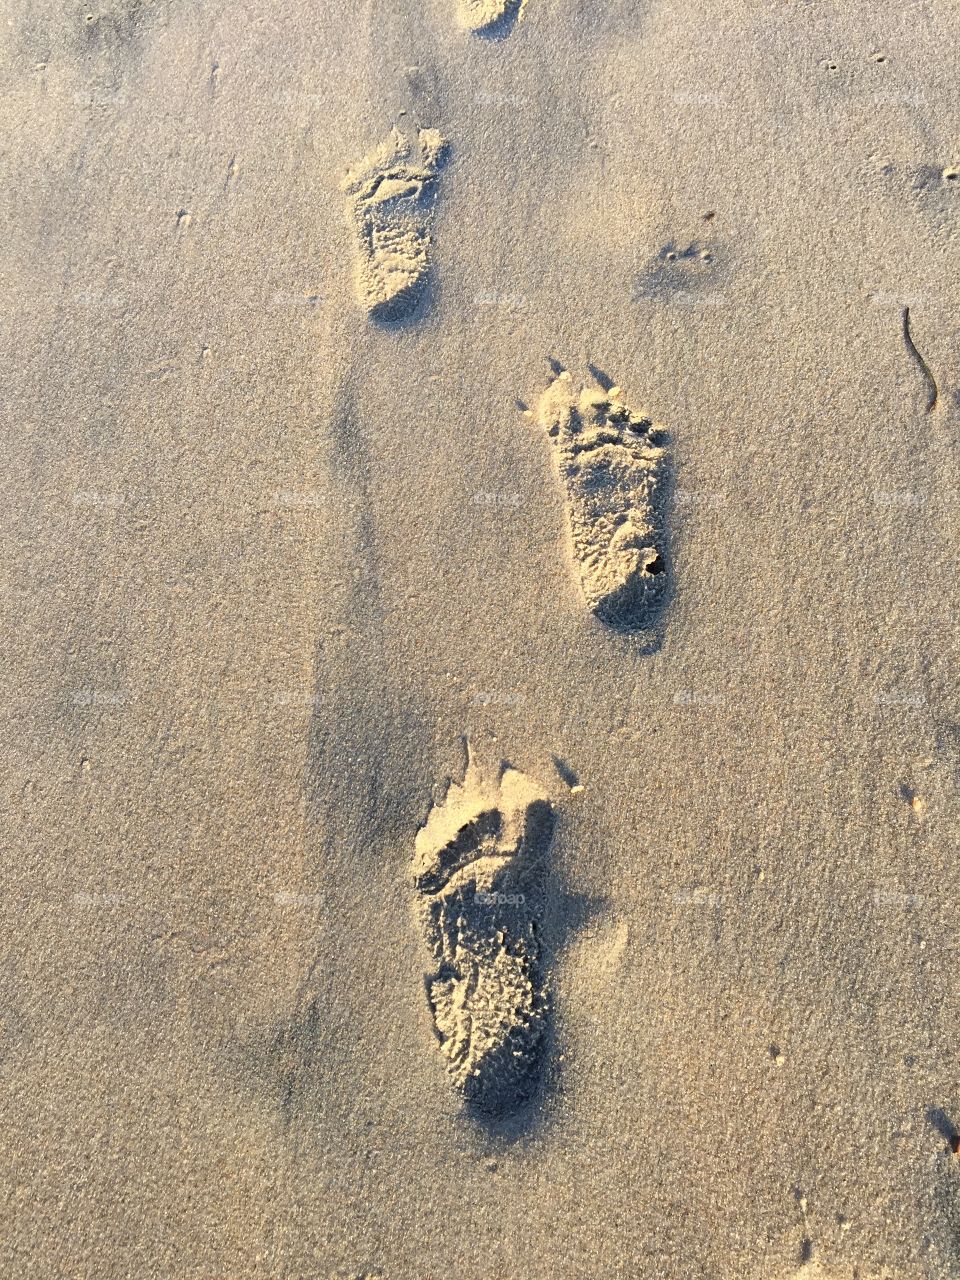 Baby footprints in the sand